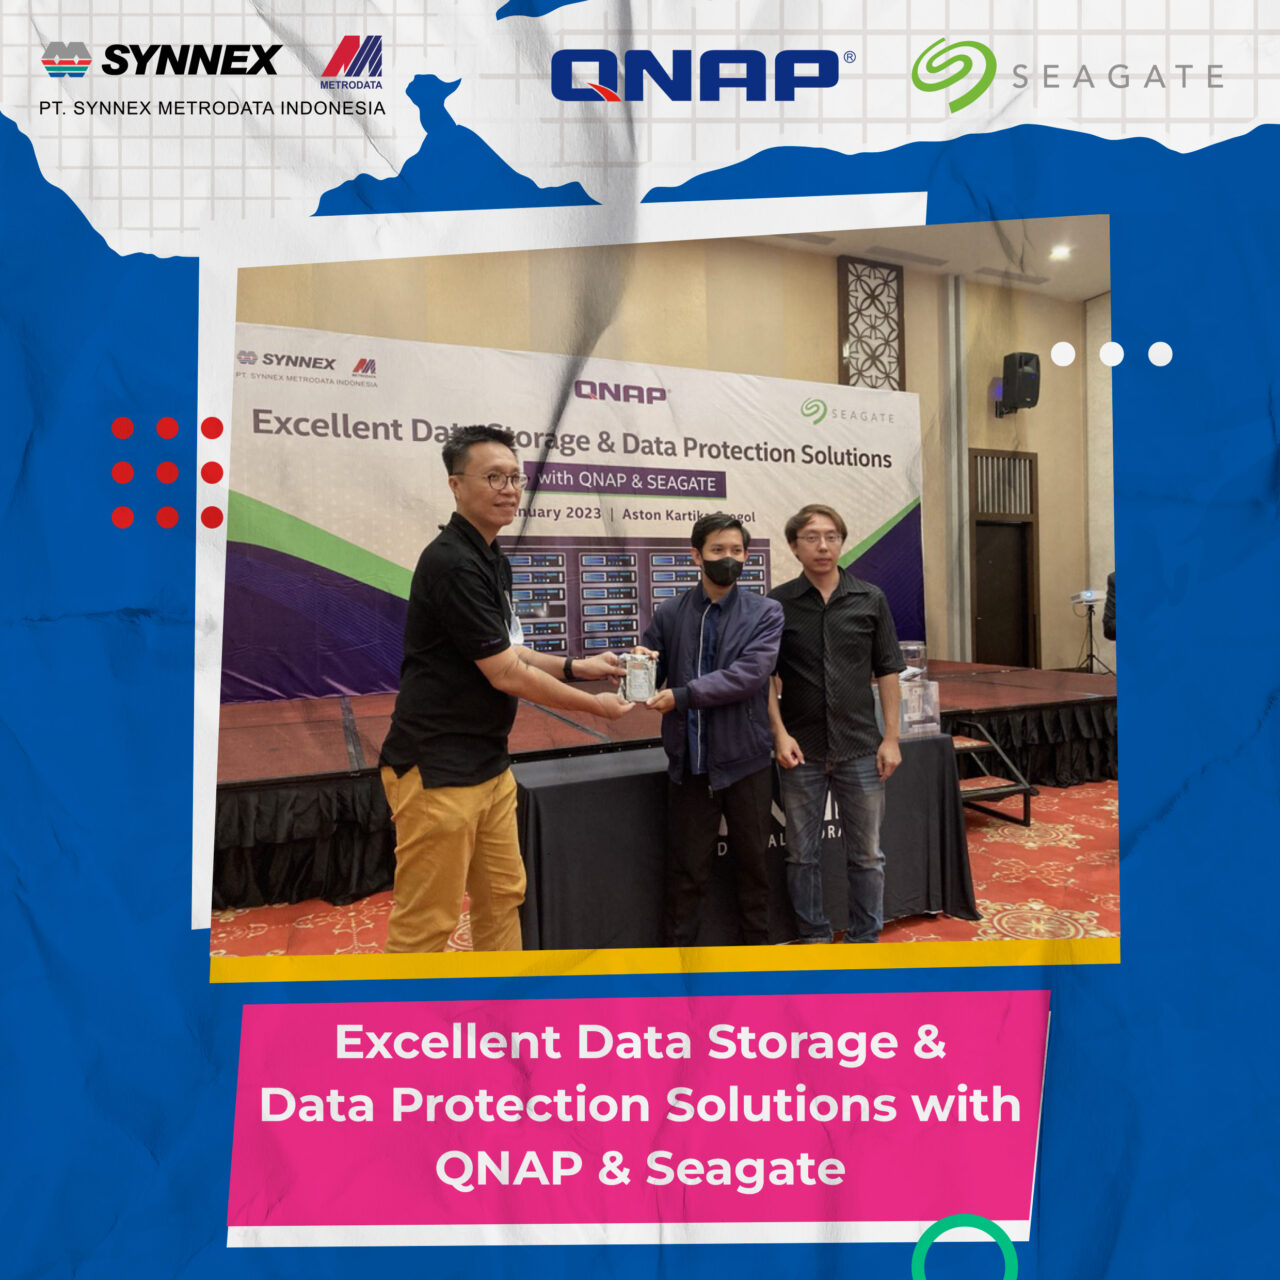 https://www.synnexmetrodata.com/wp-content/uploads/2023/01/Excellent-Data-Storage-Data-Protection-Solutions-with-QNAP-Seagate-1280x1280.jpg